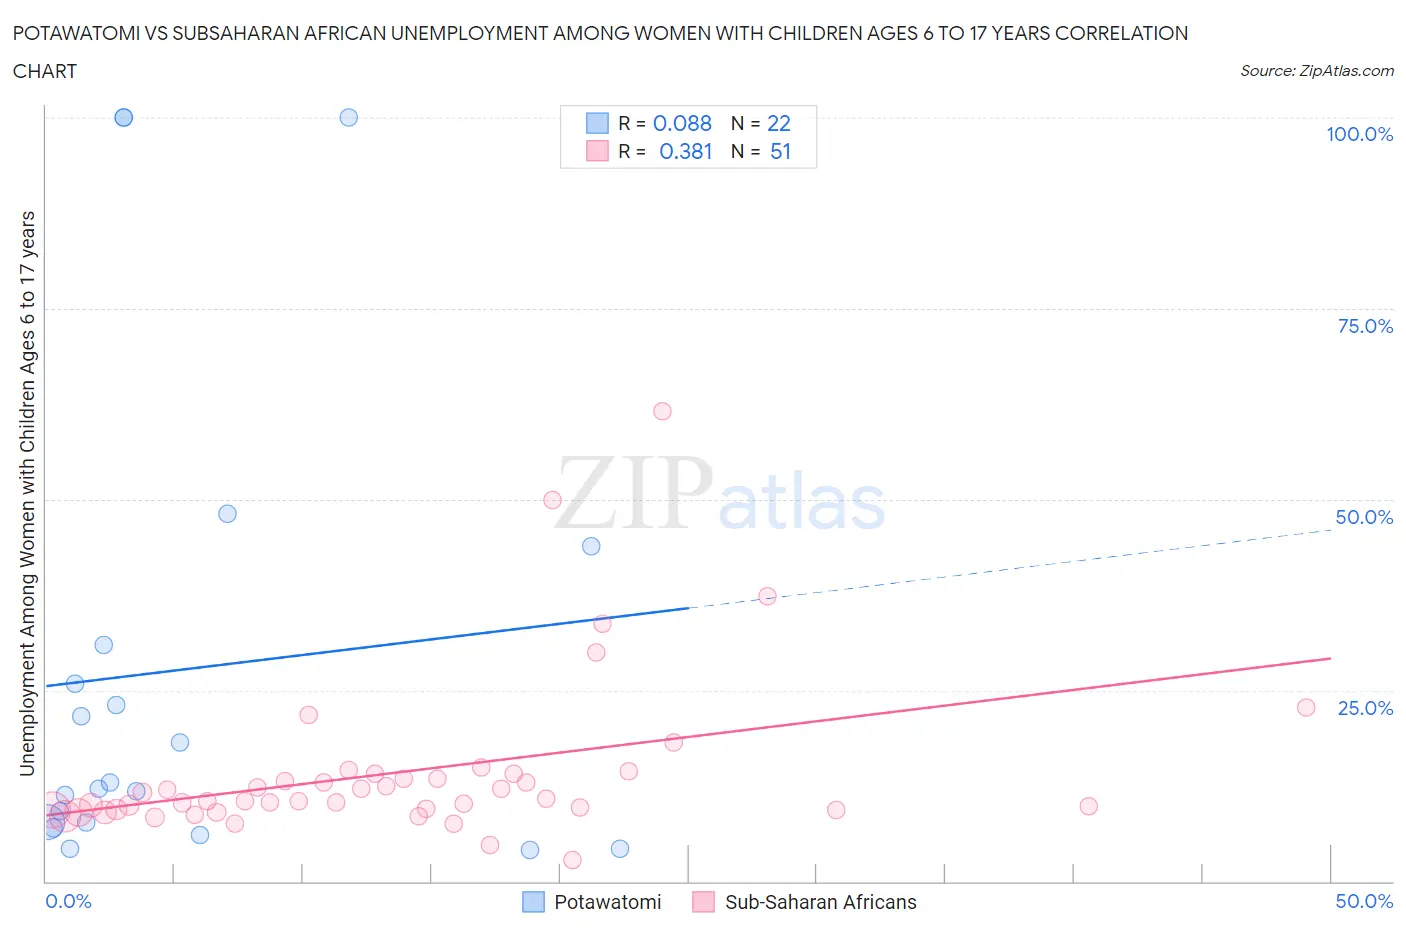 Potawatomi vs Subsaharan African Unemployment Among Women with Children Ages 6 to 17 years